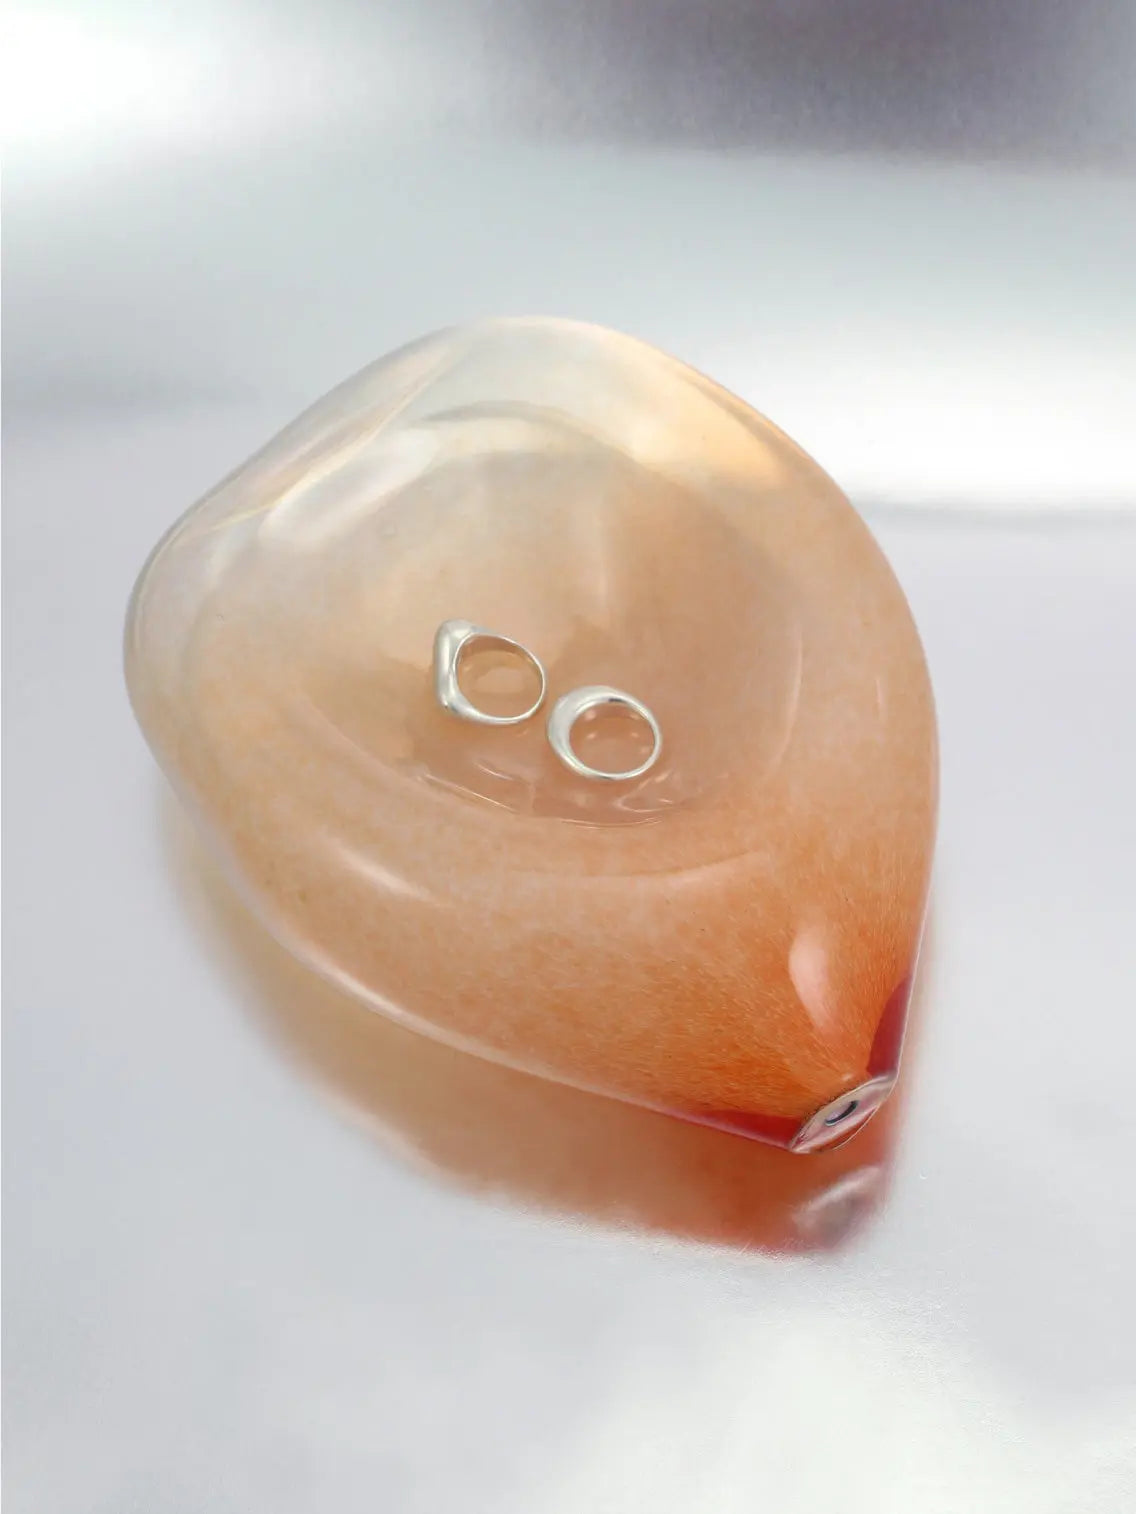 An abstract, smooth, and transparent glass sculpture from Nathalie Schreckenberg rests on a reflective surface. The Gil Plate Peach features a soft, organic shape with subtle gradients of amber hues blending into clear glass, creating a serene and fluid visual effect. Perfect for any Barcelona-inspired decor.